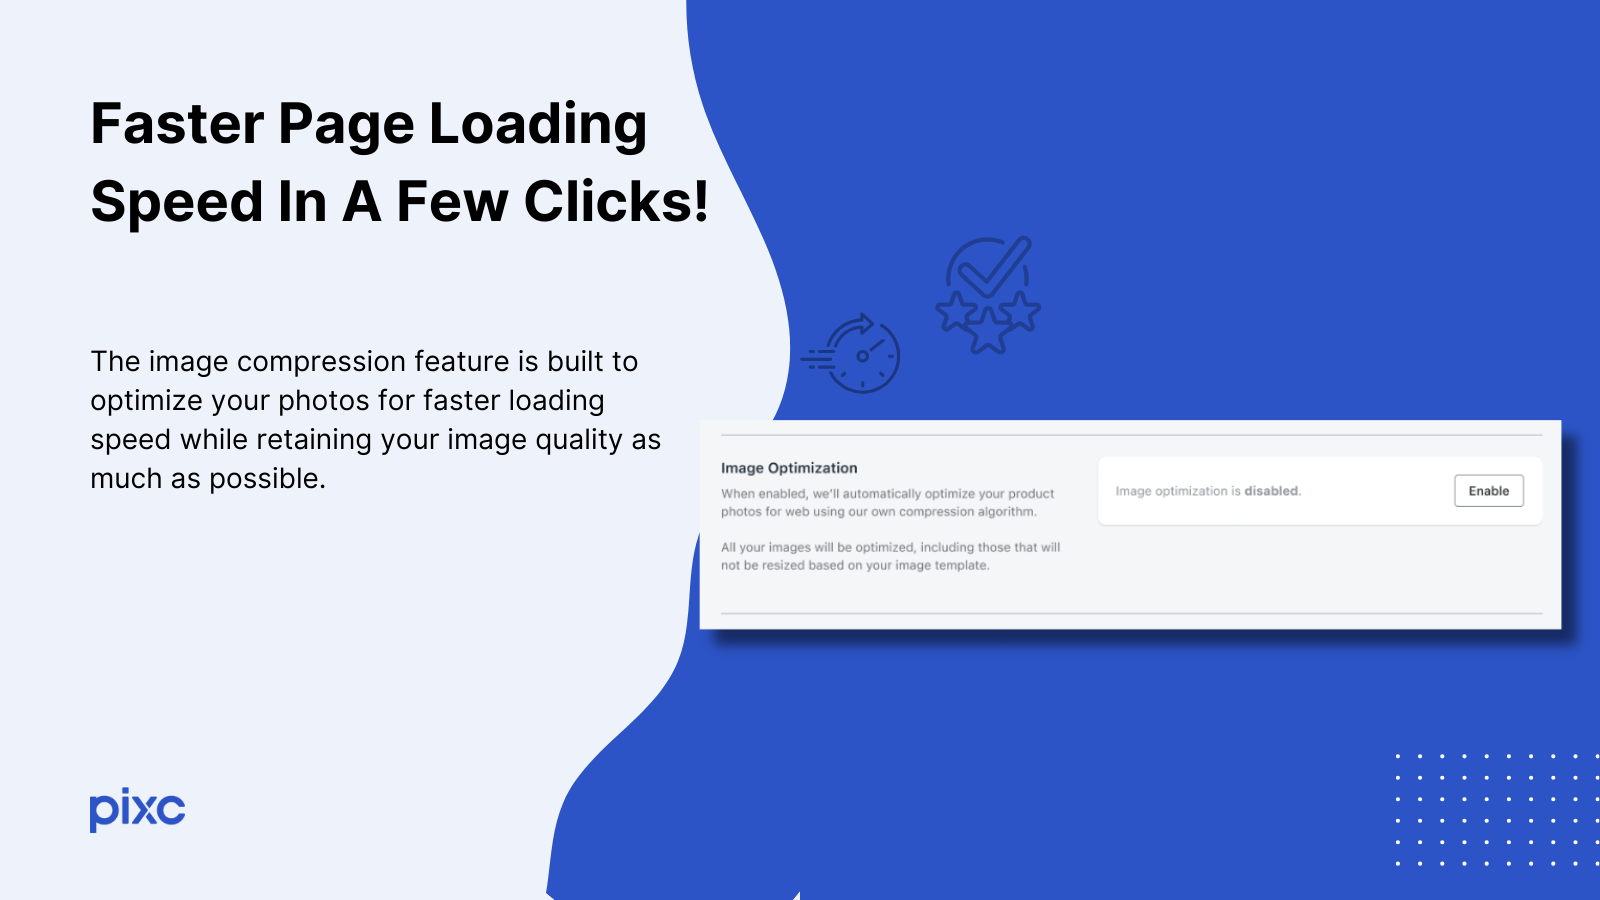 Faster Page Loading Speed In A Few Clicks!